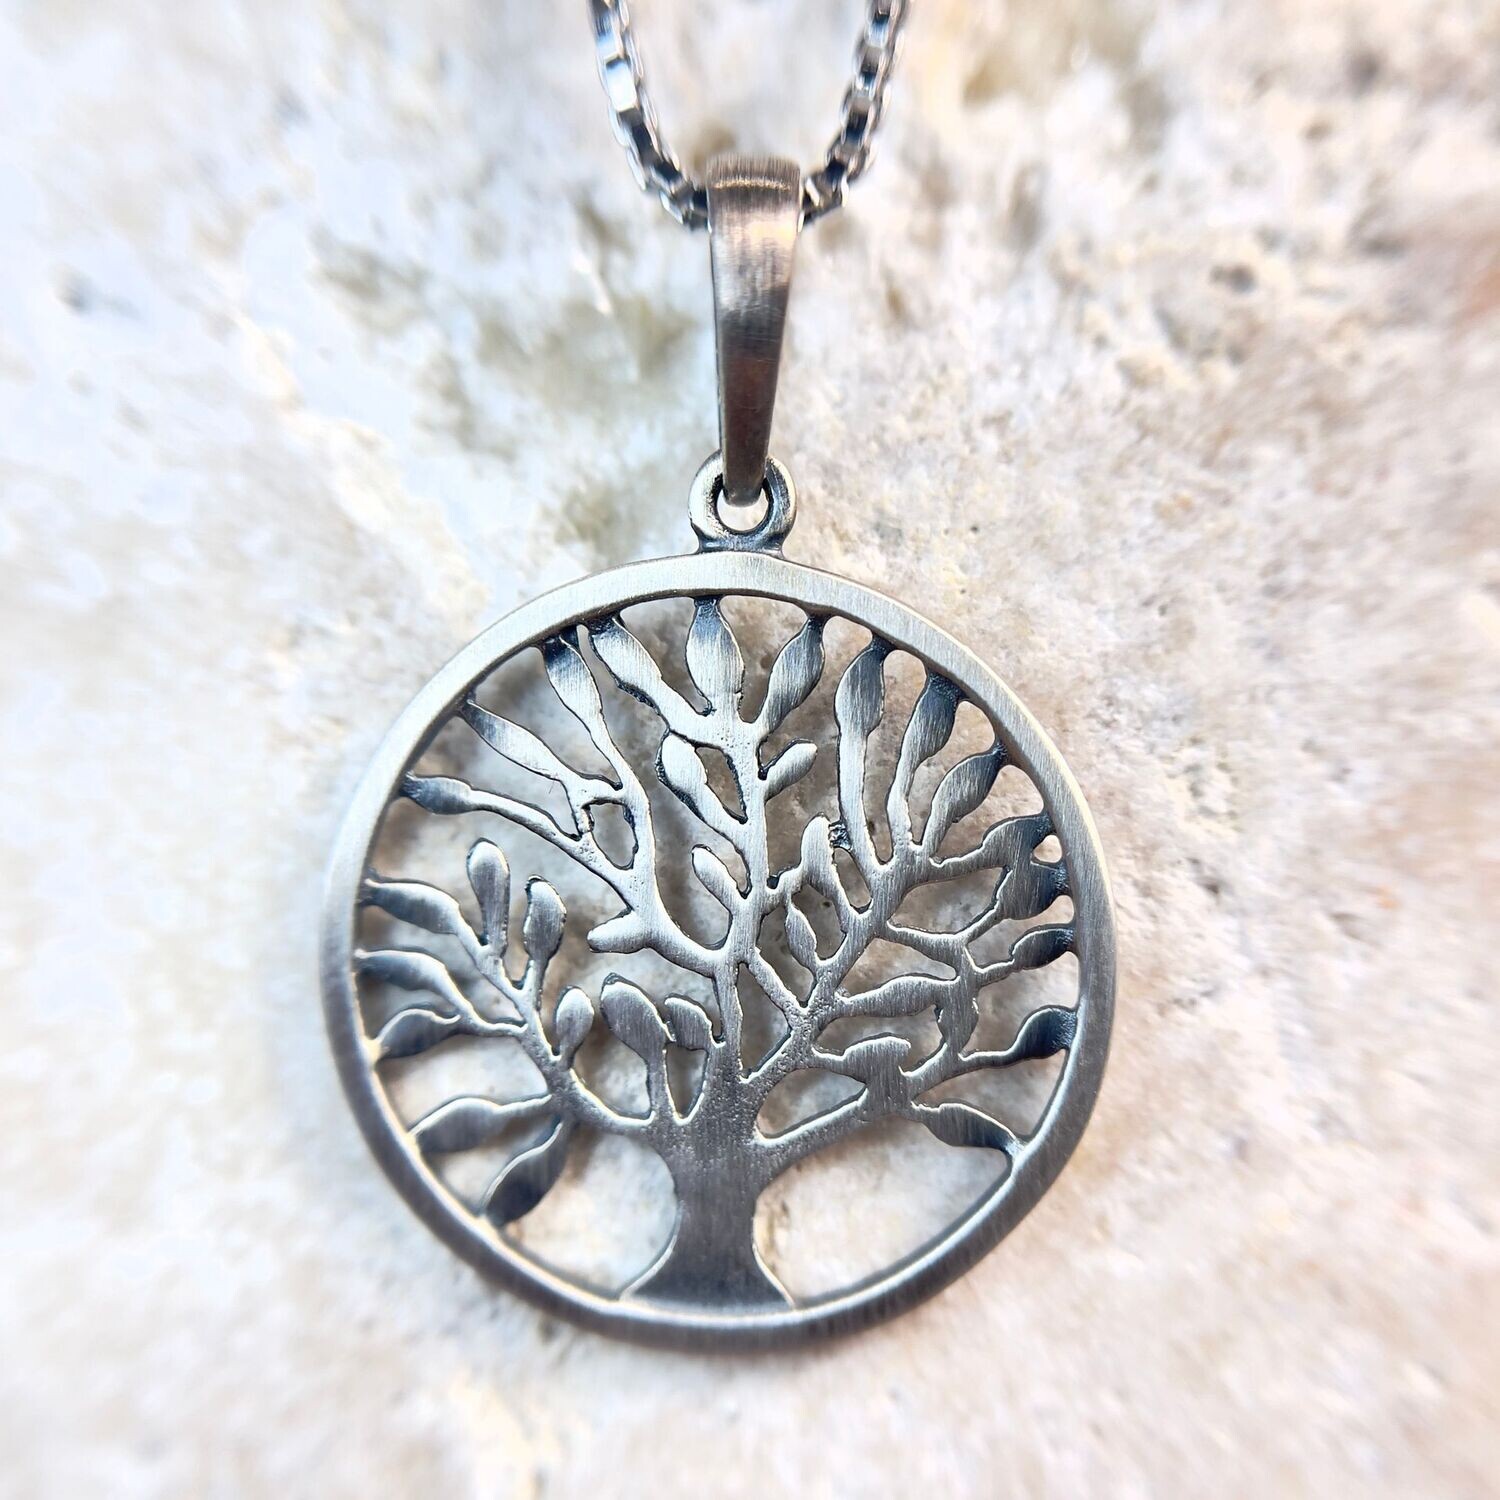 Silver Secrets P18-0430 Sterling Silver Tree of Life Pendant (Chain not included)